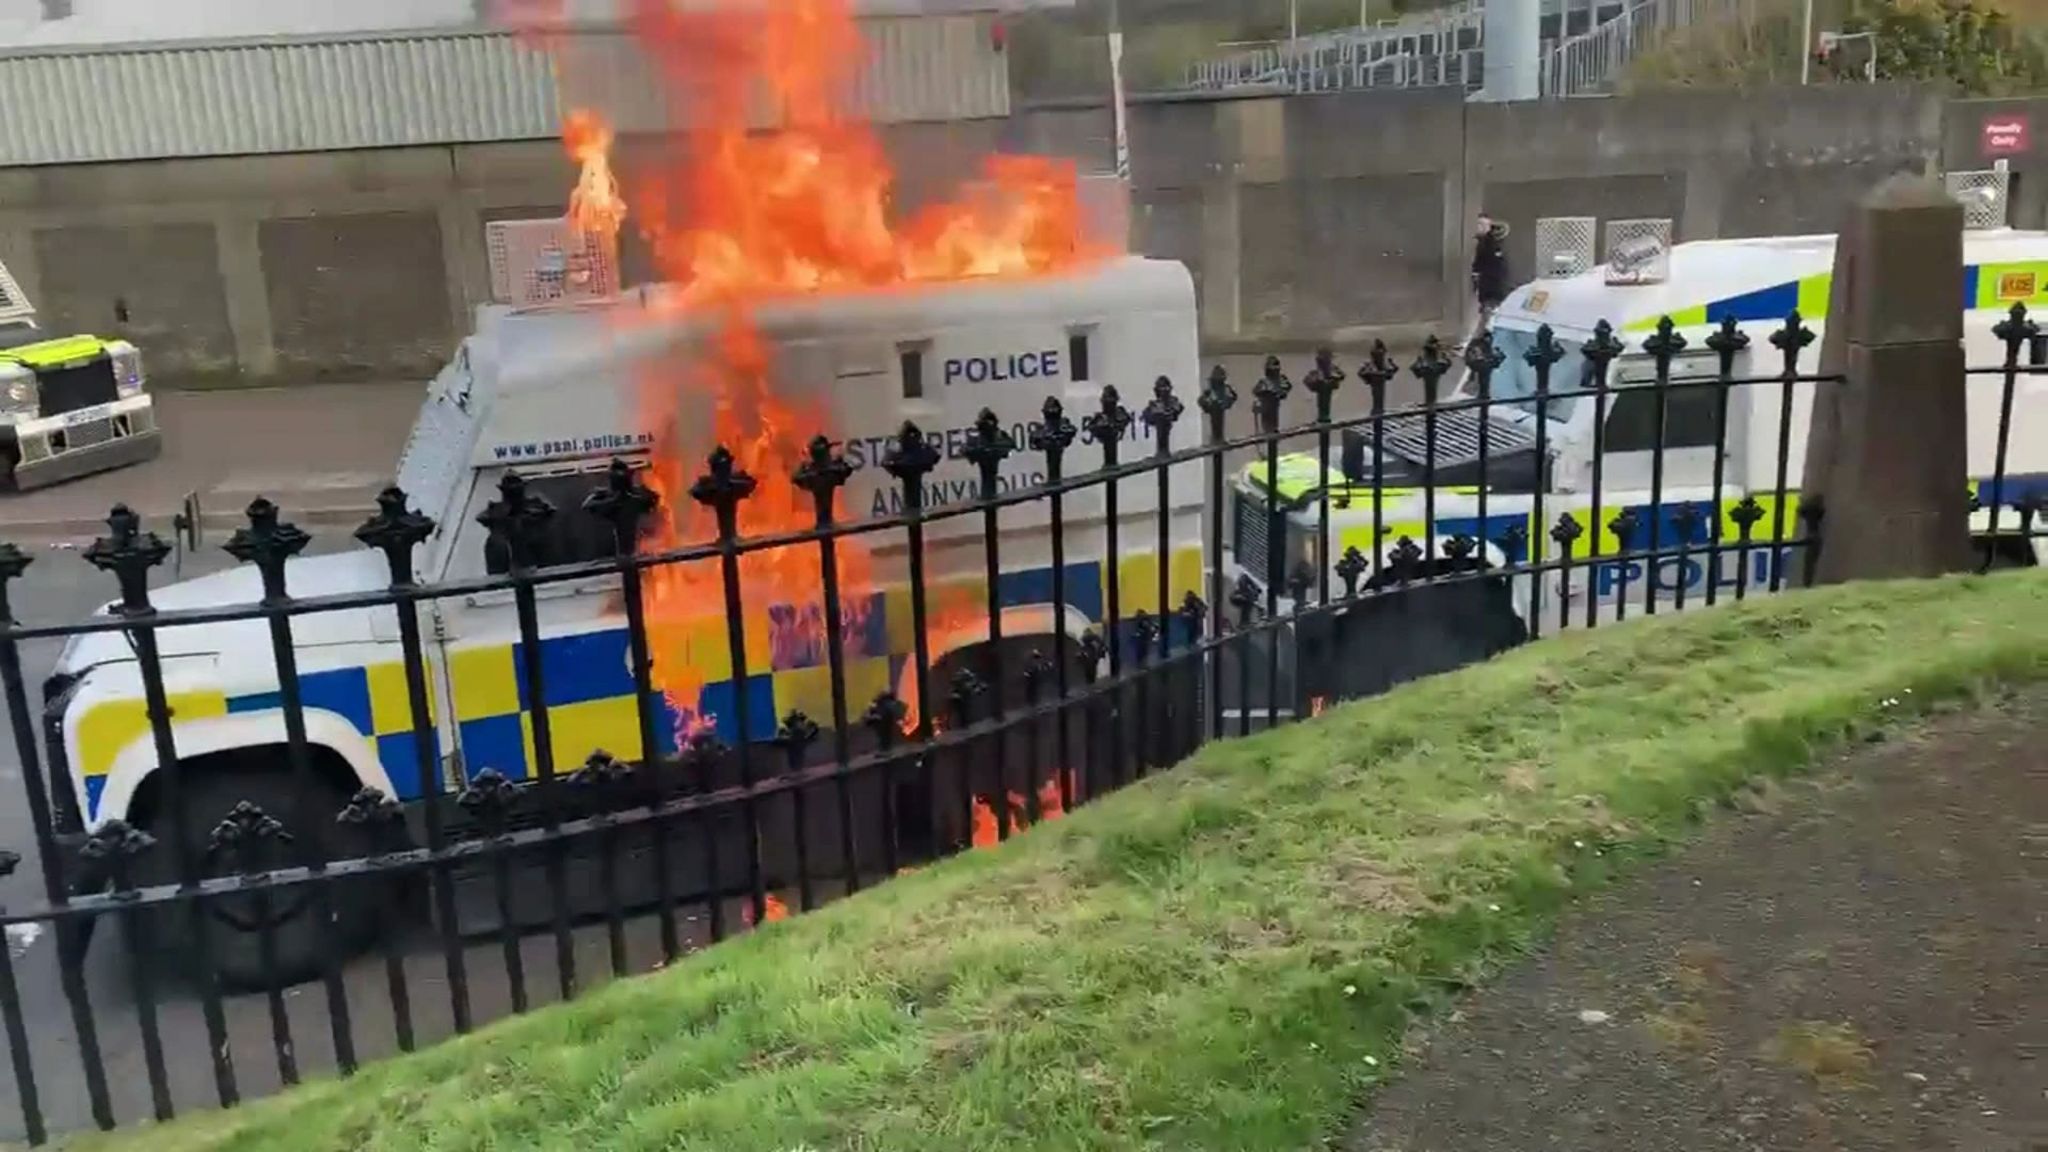 Petrol bomb attack on the police